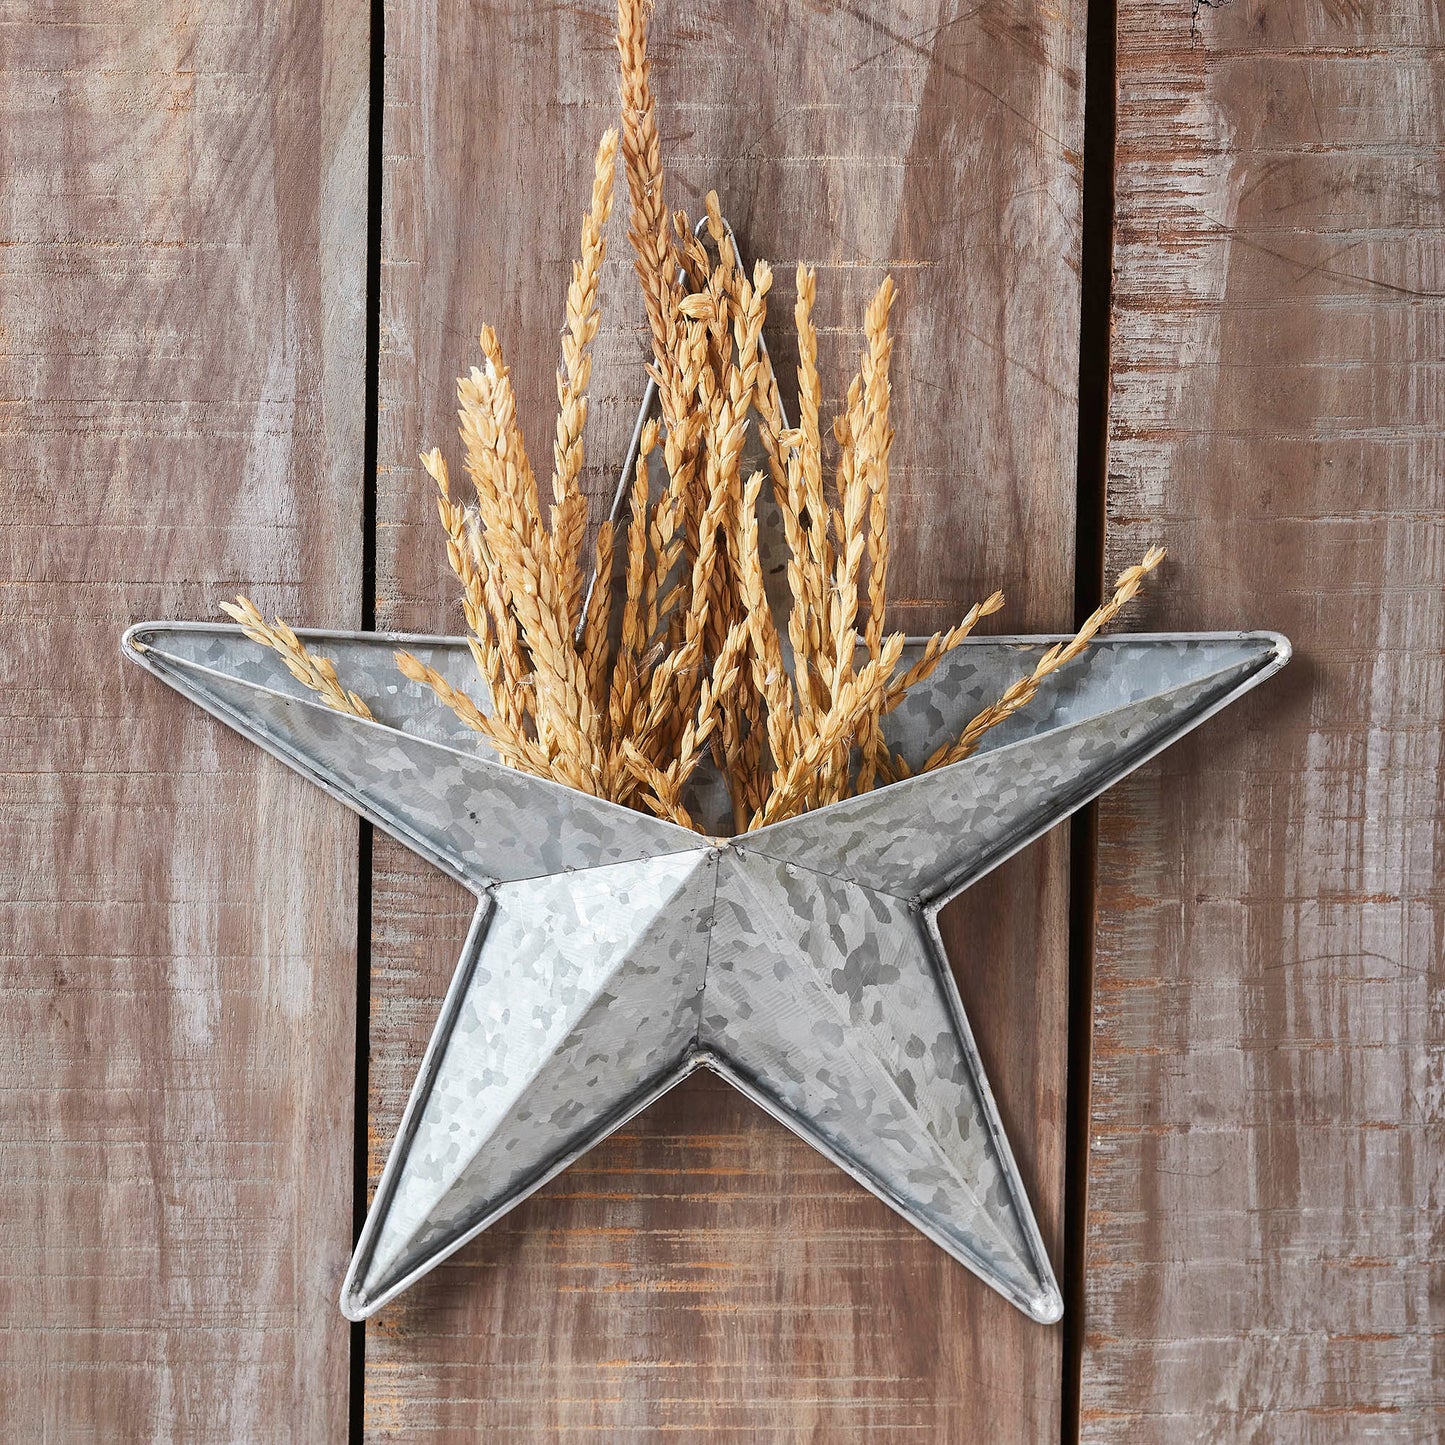 VHC Brands Patriotic Faceted Metal Star Galvanized Wall Hanging w/ Pocket 12x12, Independence Day Decor, American Star with display pocket, Distressed Appearance Wall Hanging,  Star Shape, Grey